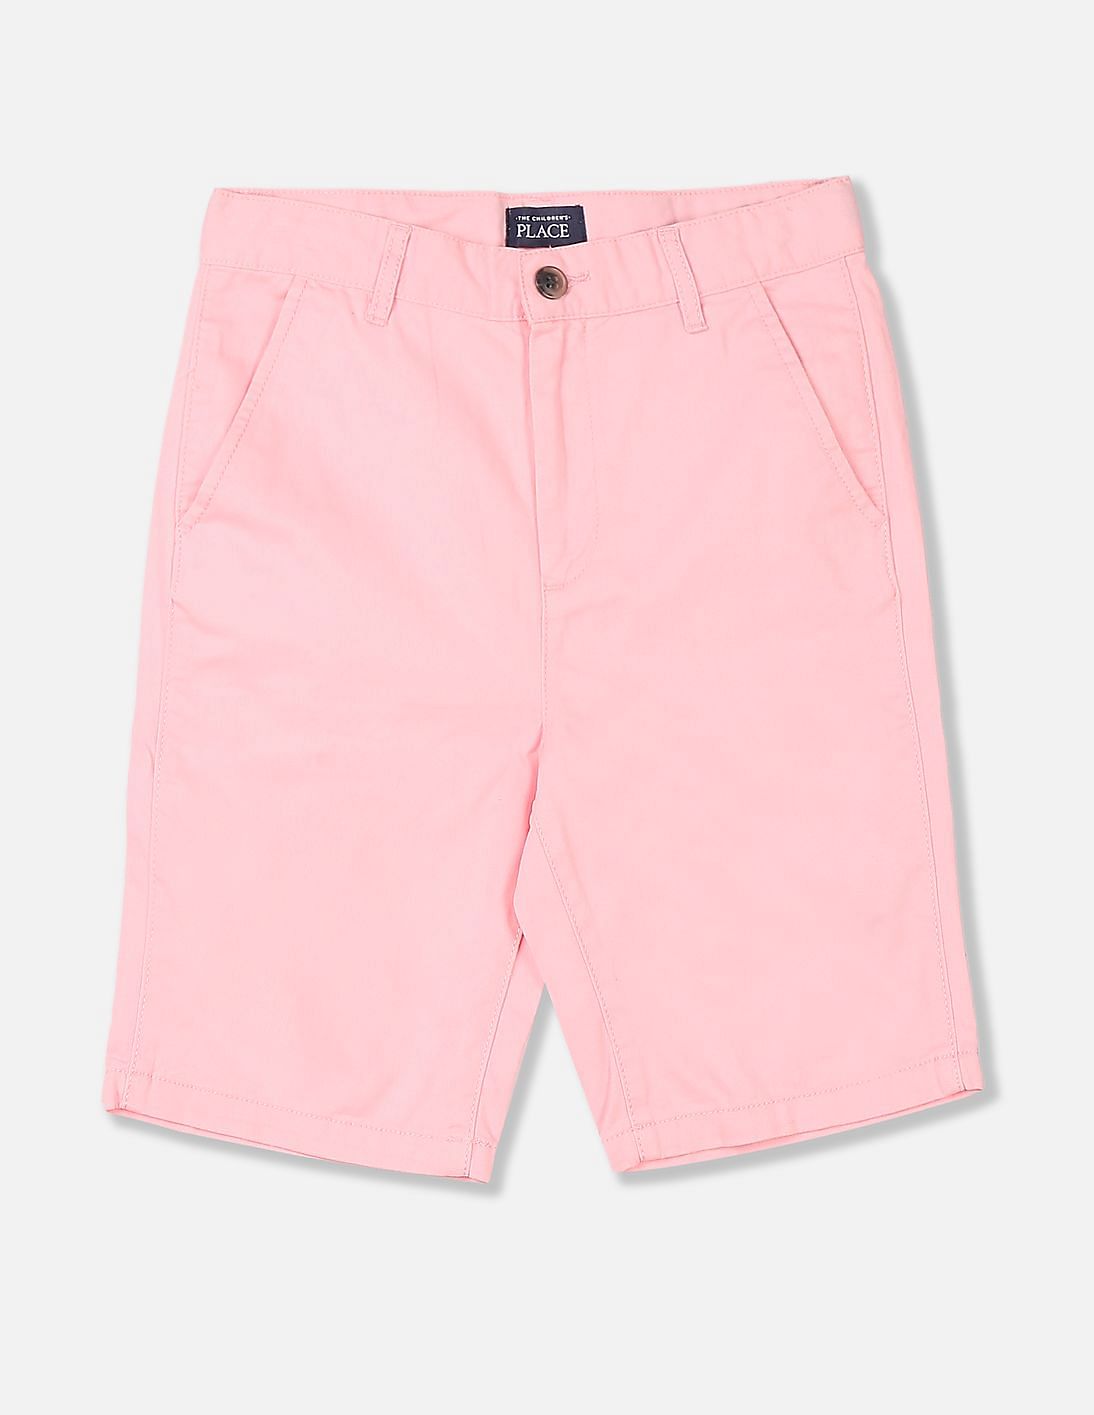 Buy The Children's Place Boys Pink Solid Chino Shorts - NNNOW.com